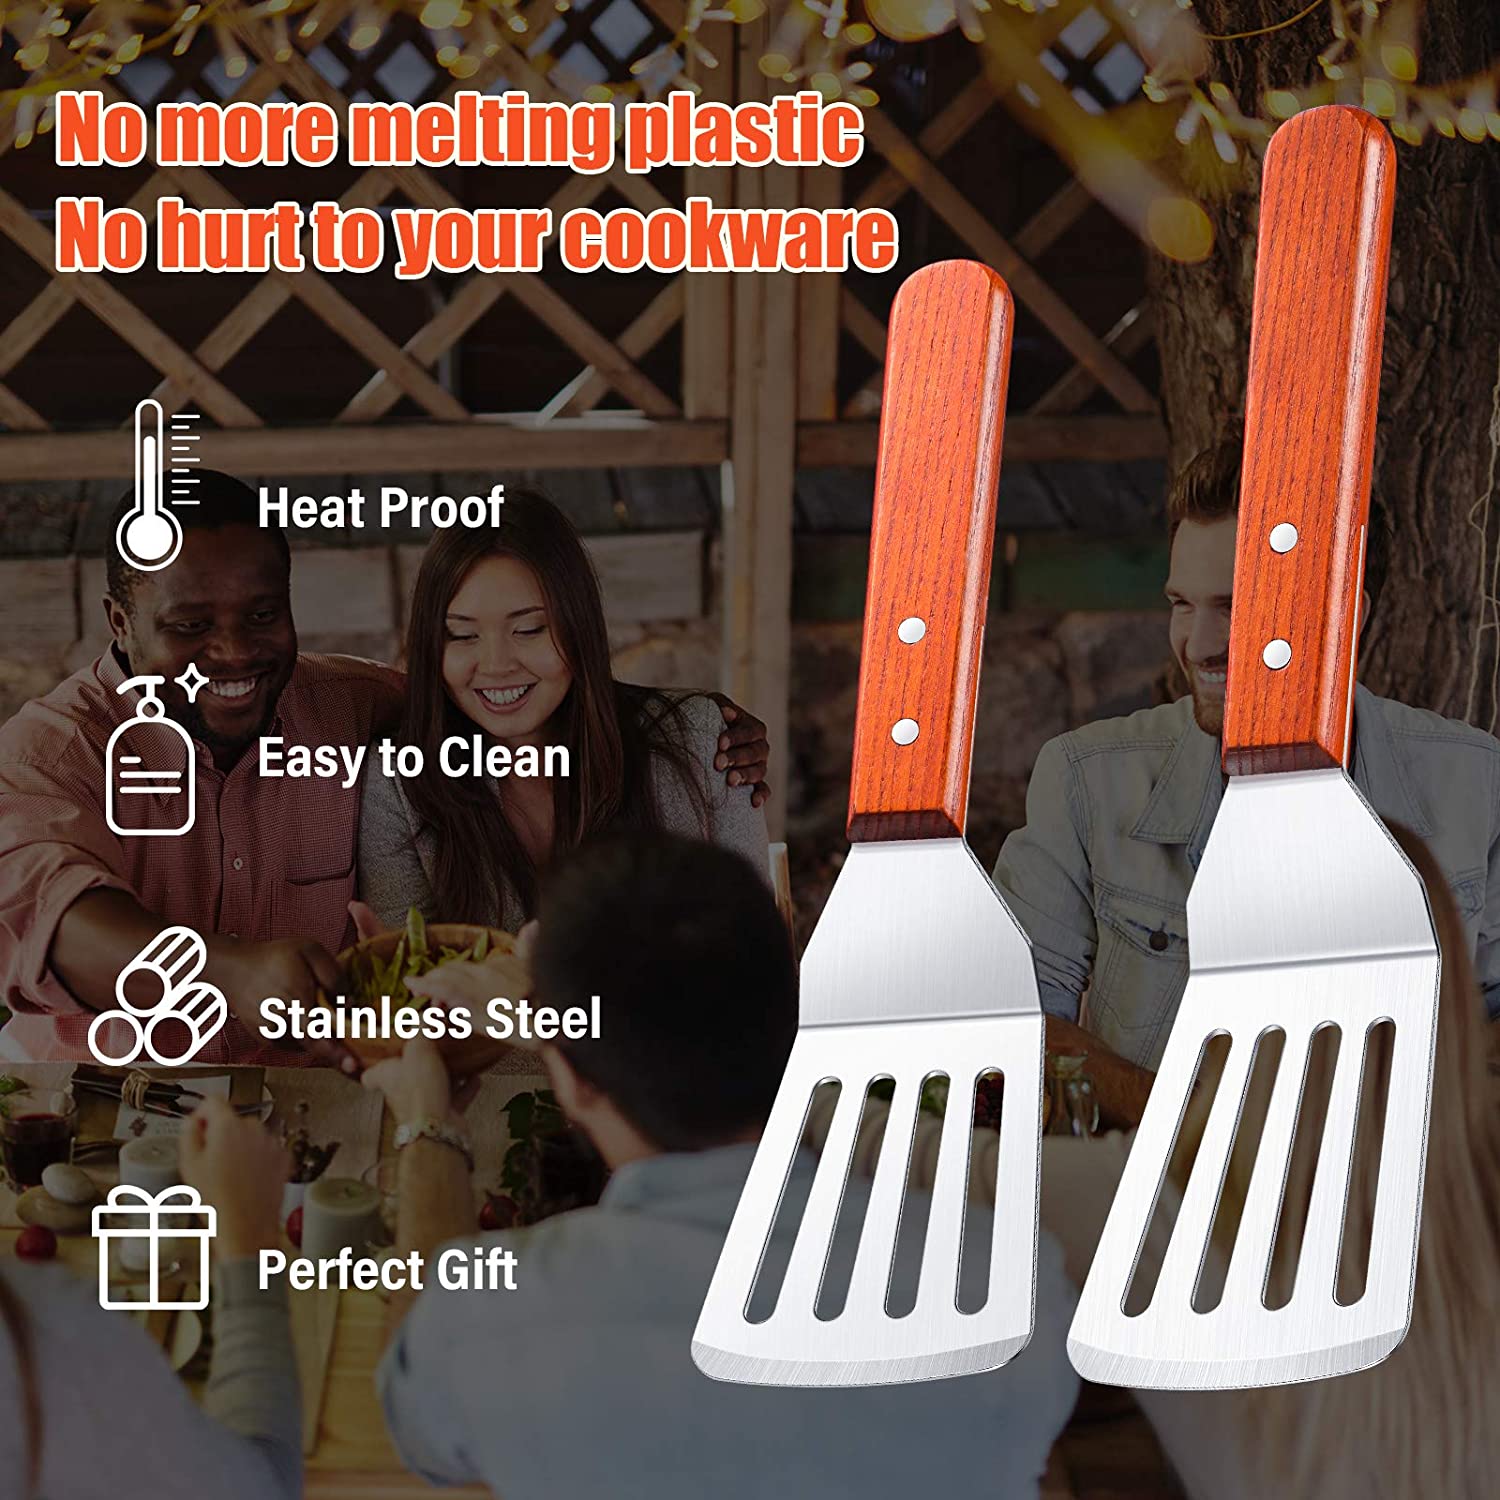 2 Pieces Slotted Fish Spatulas with Wooden Handle and Stainless Steel Wide Thin Kitchen Cooking Spatula Turner Beveled Edge Curved Spatula 